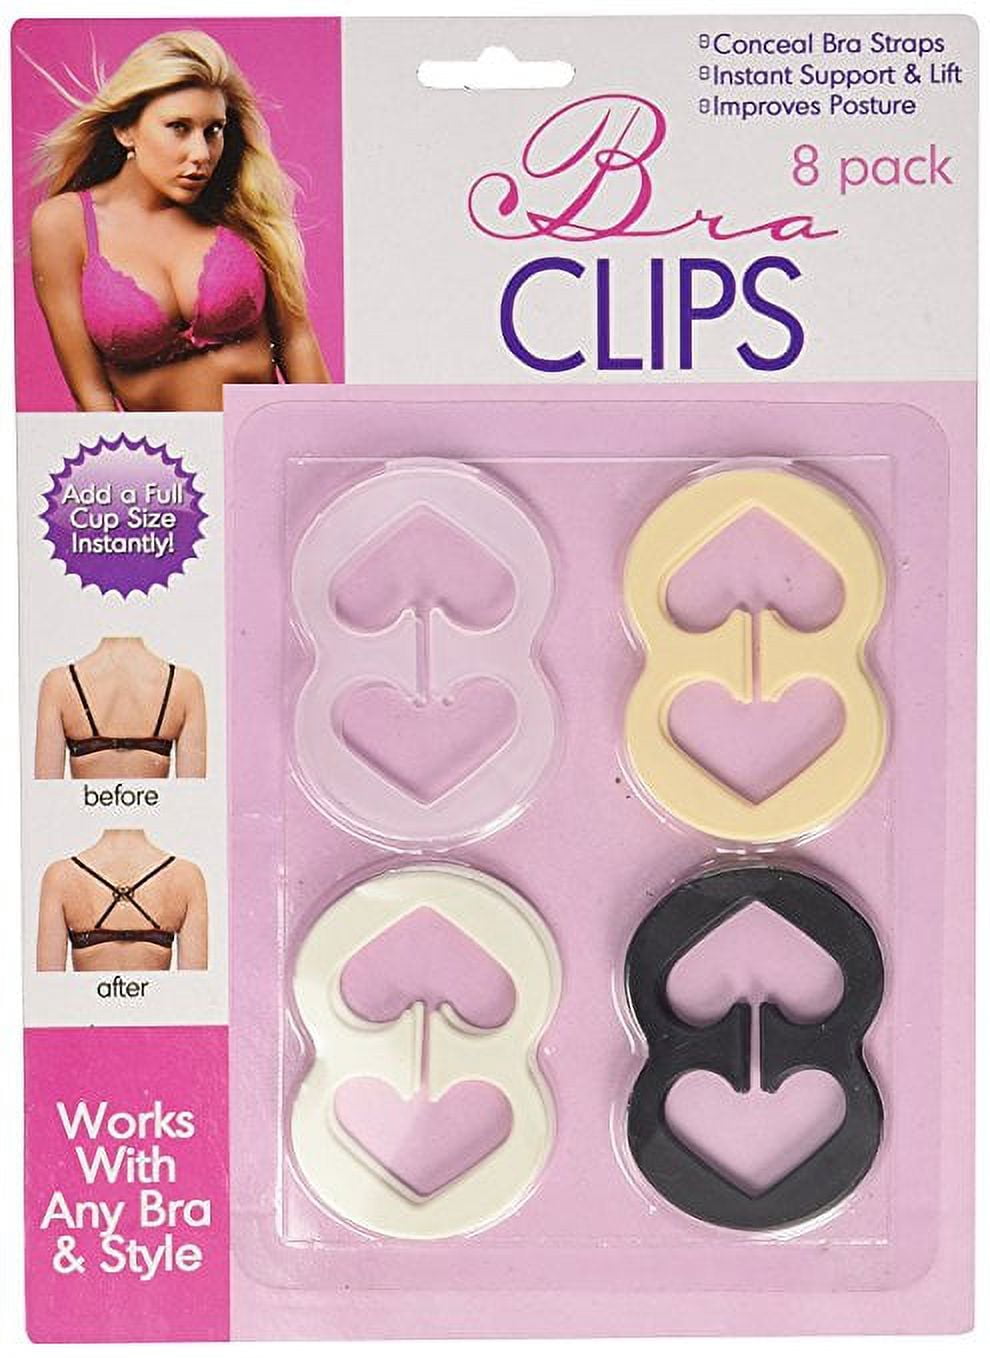 8-pack Bra Back Clips - Conceal Bra Straps - Add Full Cup Size 